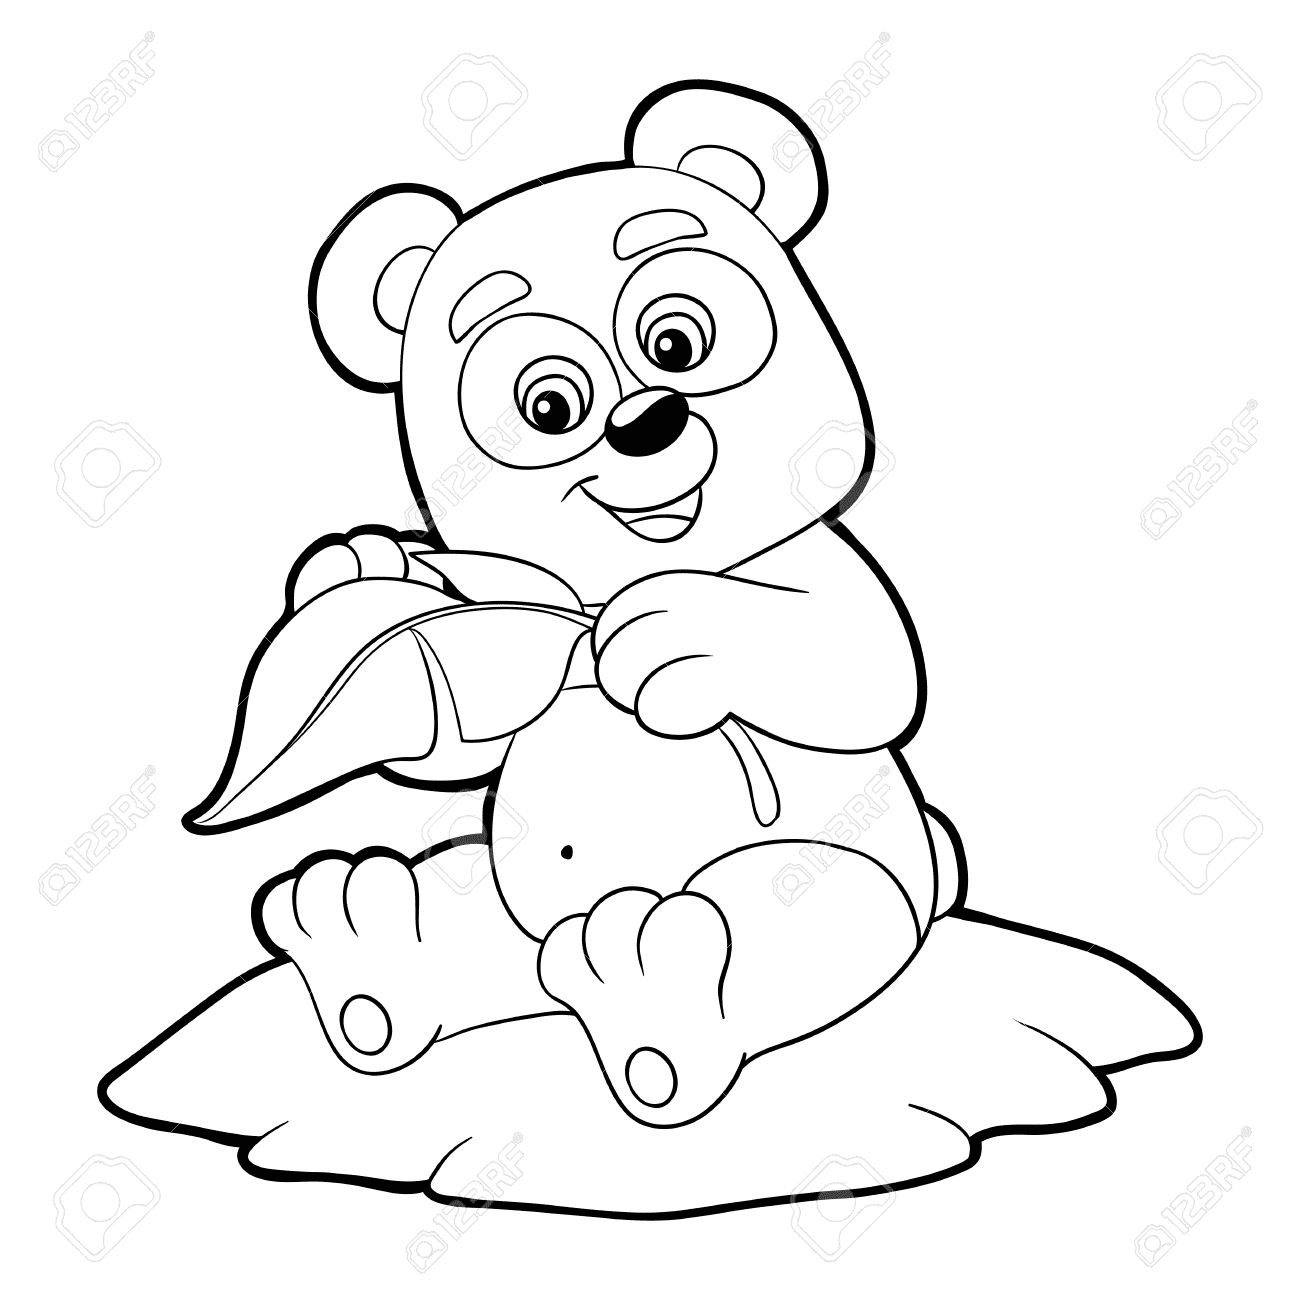 Panda Holding Leaf Coloring Pages